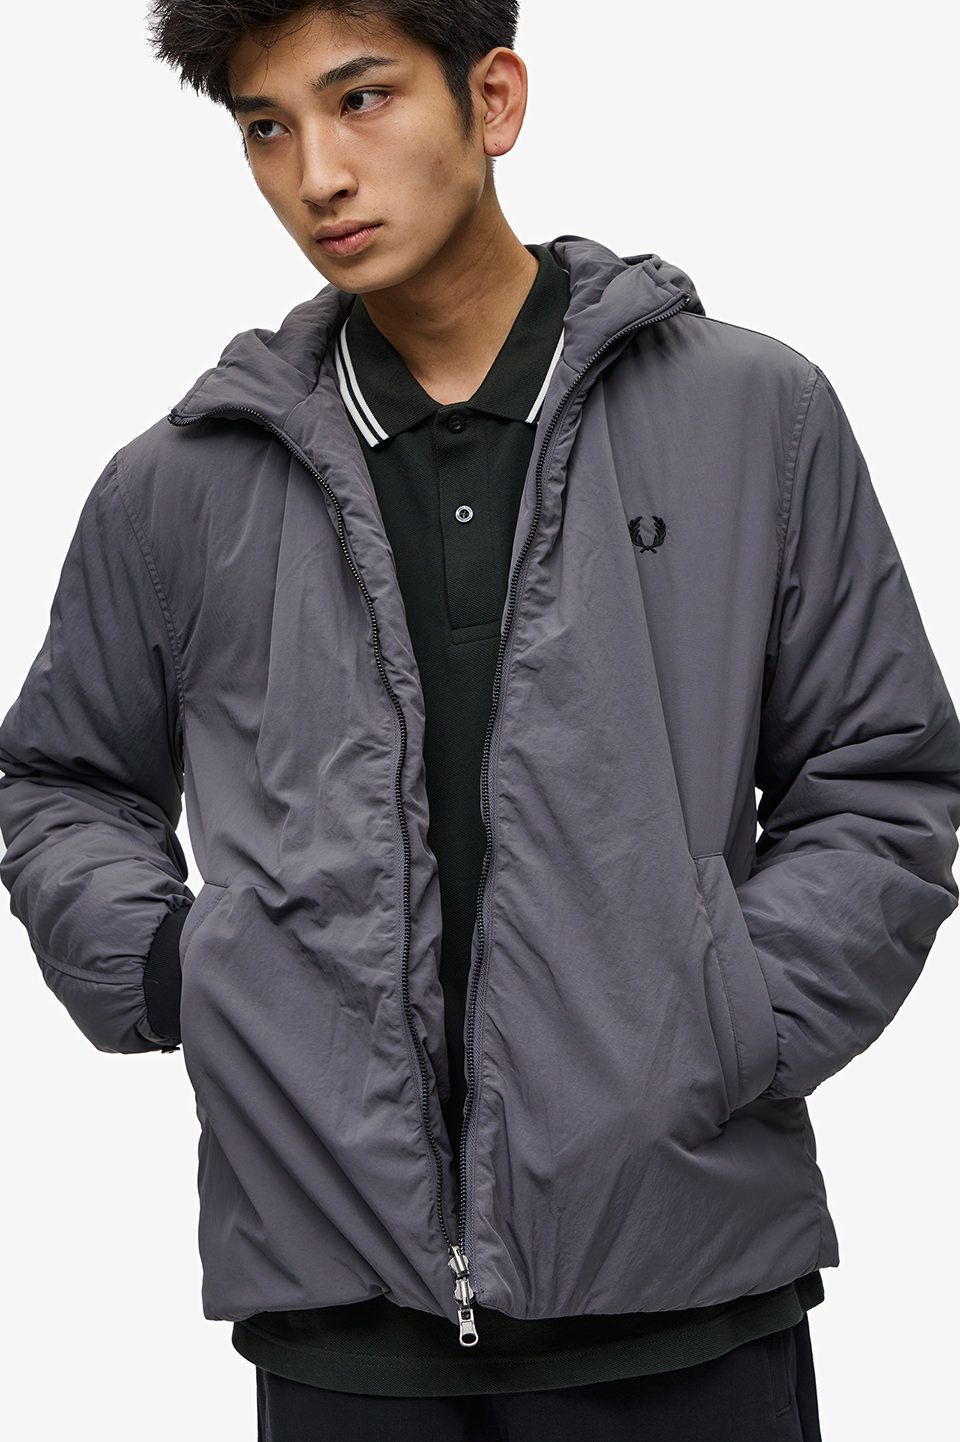 FRED PERRY 22aw Men Fishtail Parka